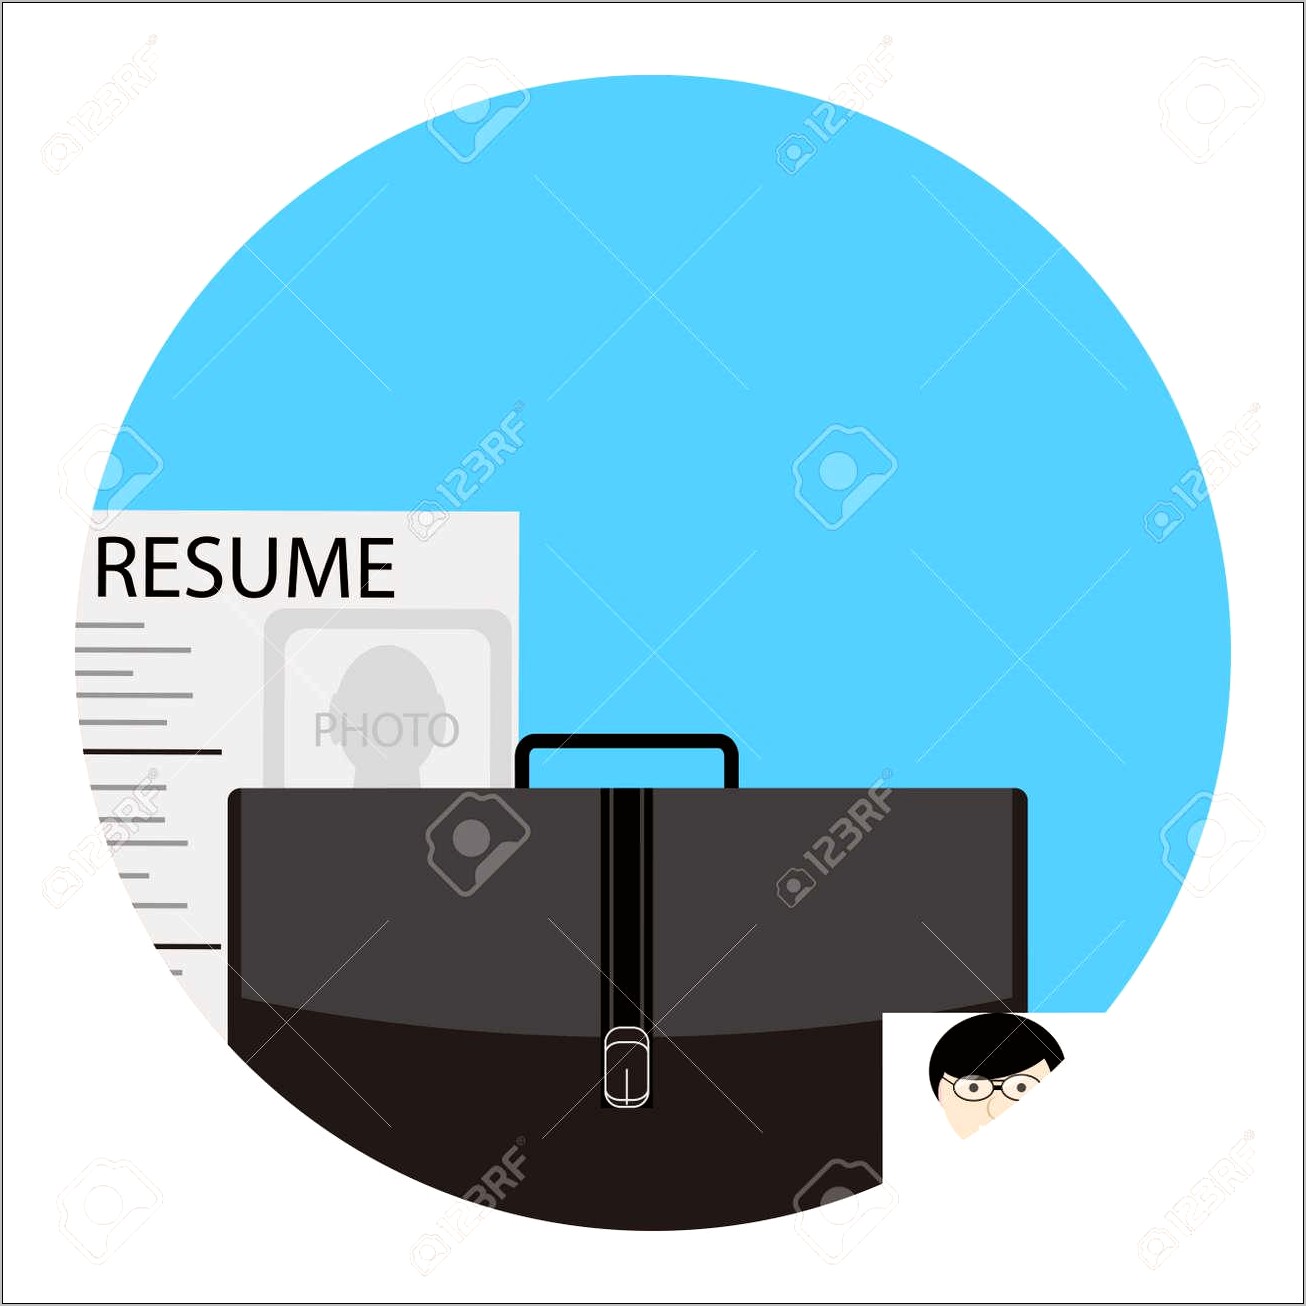 About Com Job Searching Resume